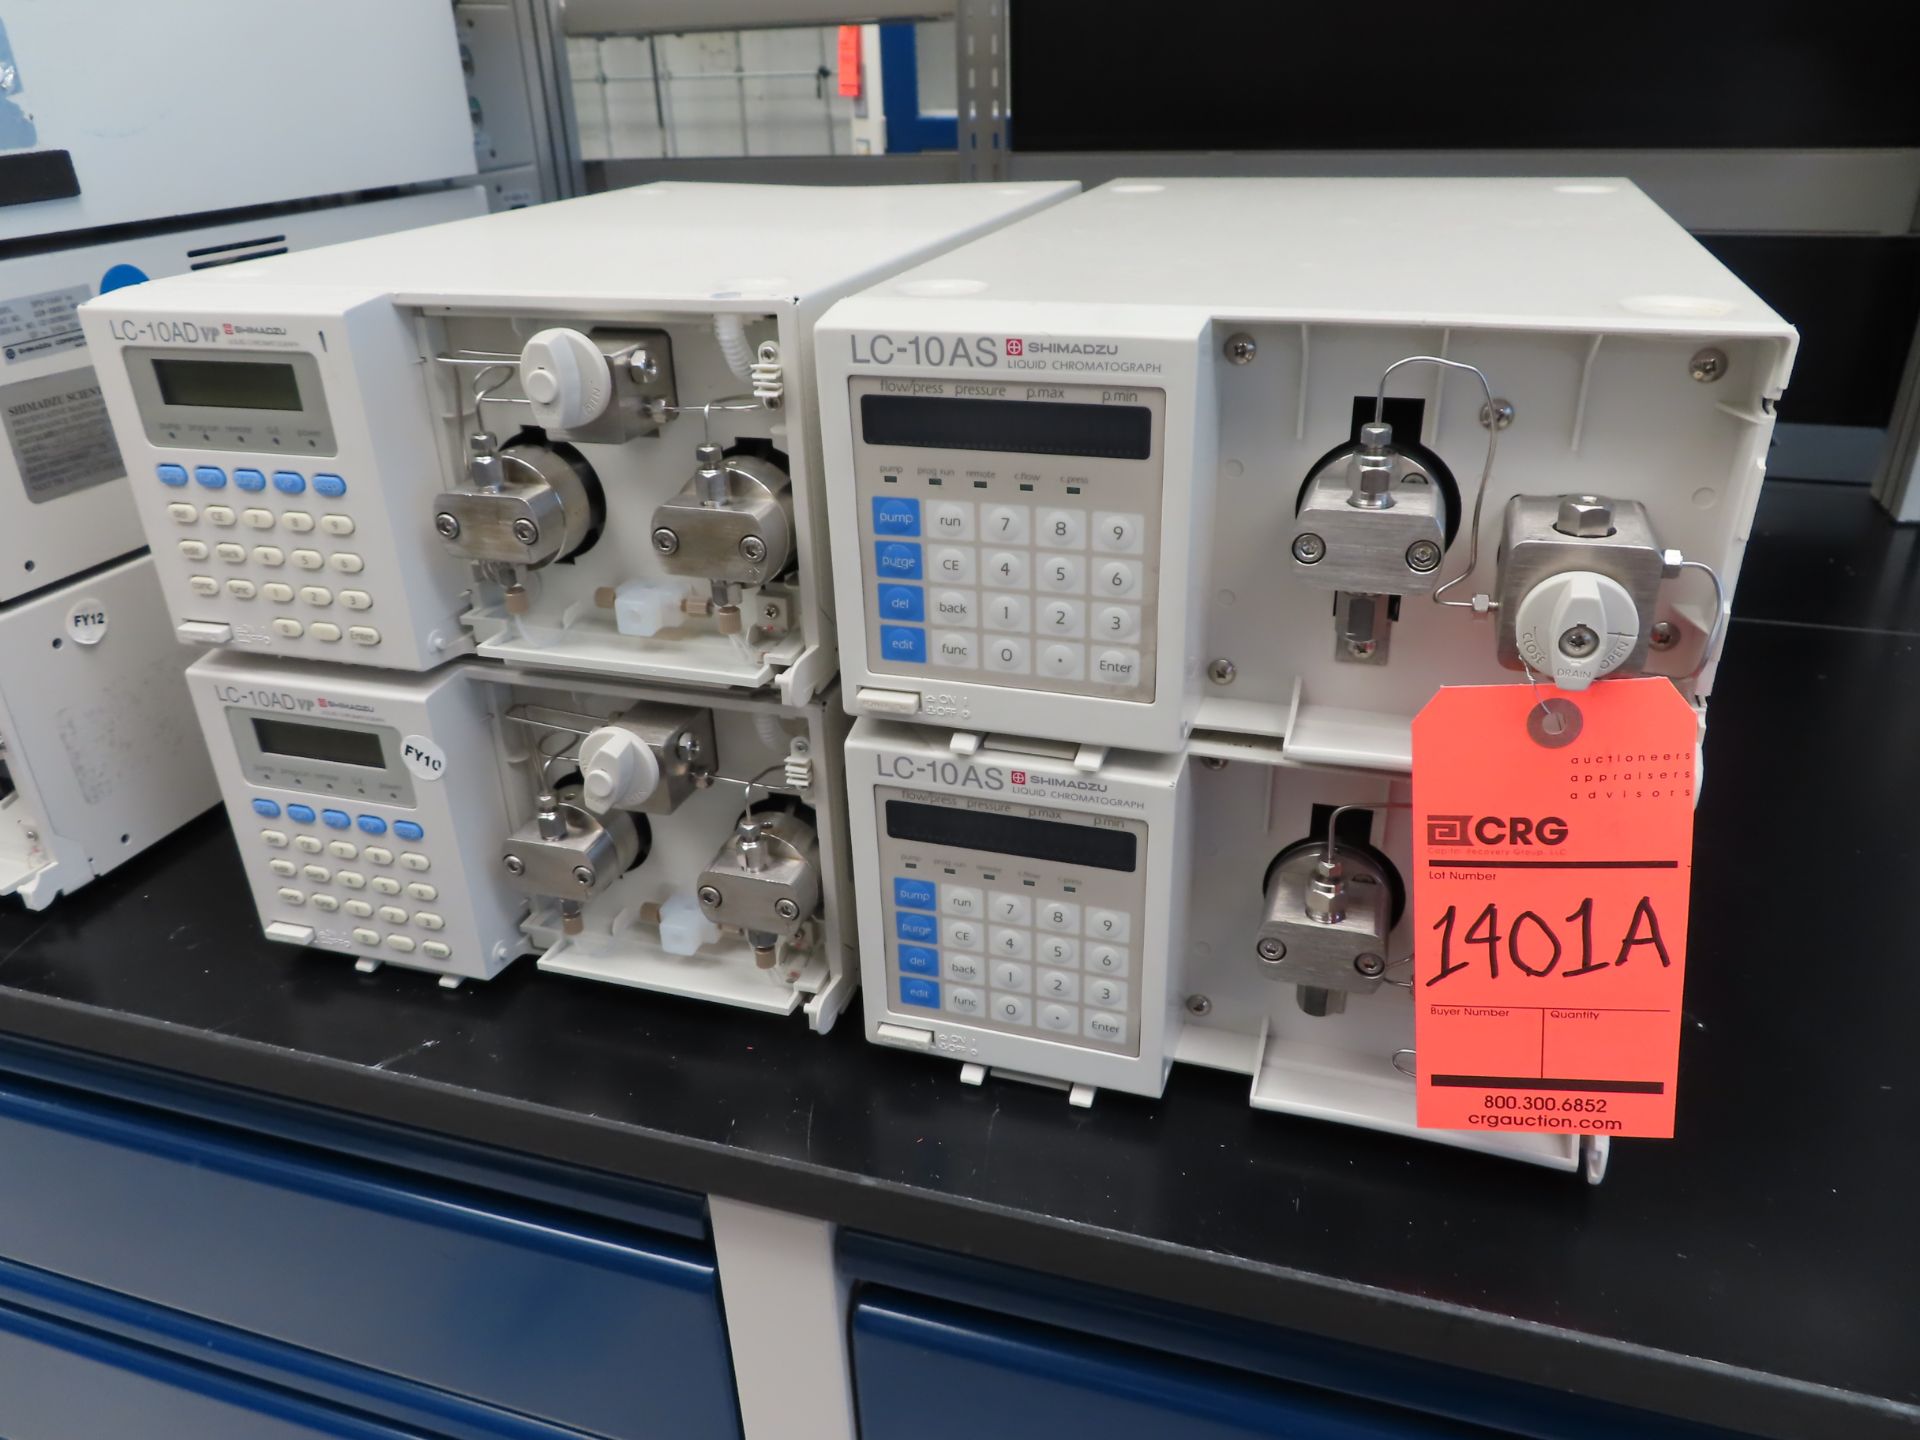 Lot of (4) assorted Shimadzu liquid chromatograph pumps including: (2) LC-10AD VP and (2) LC-10AS,